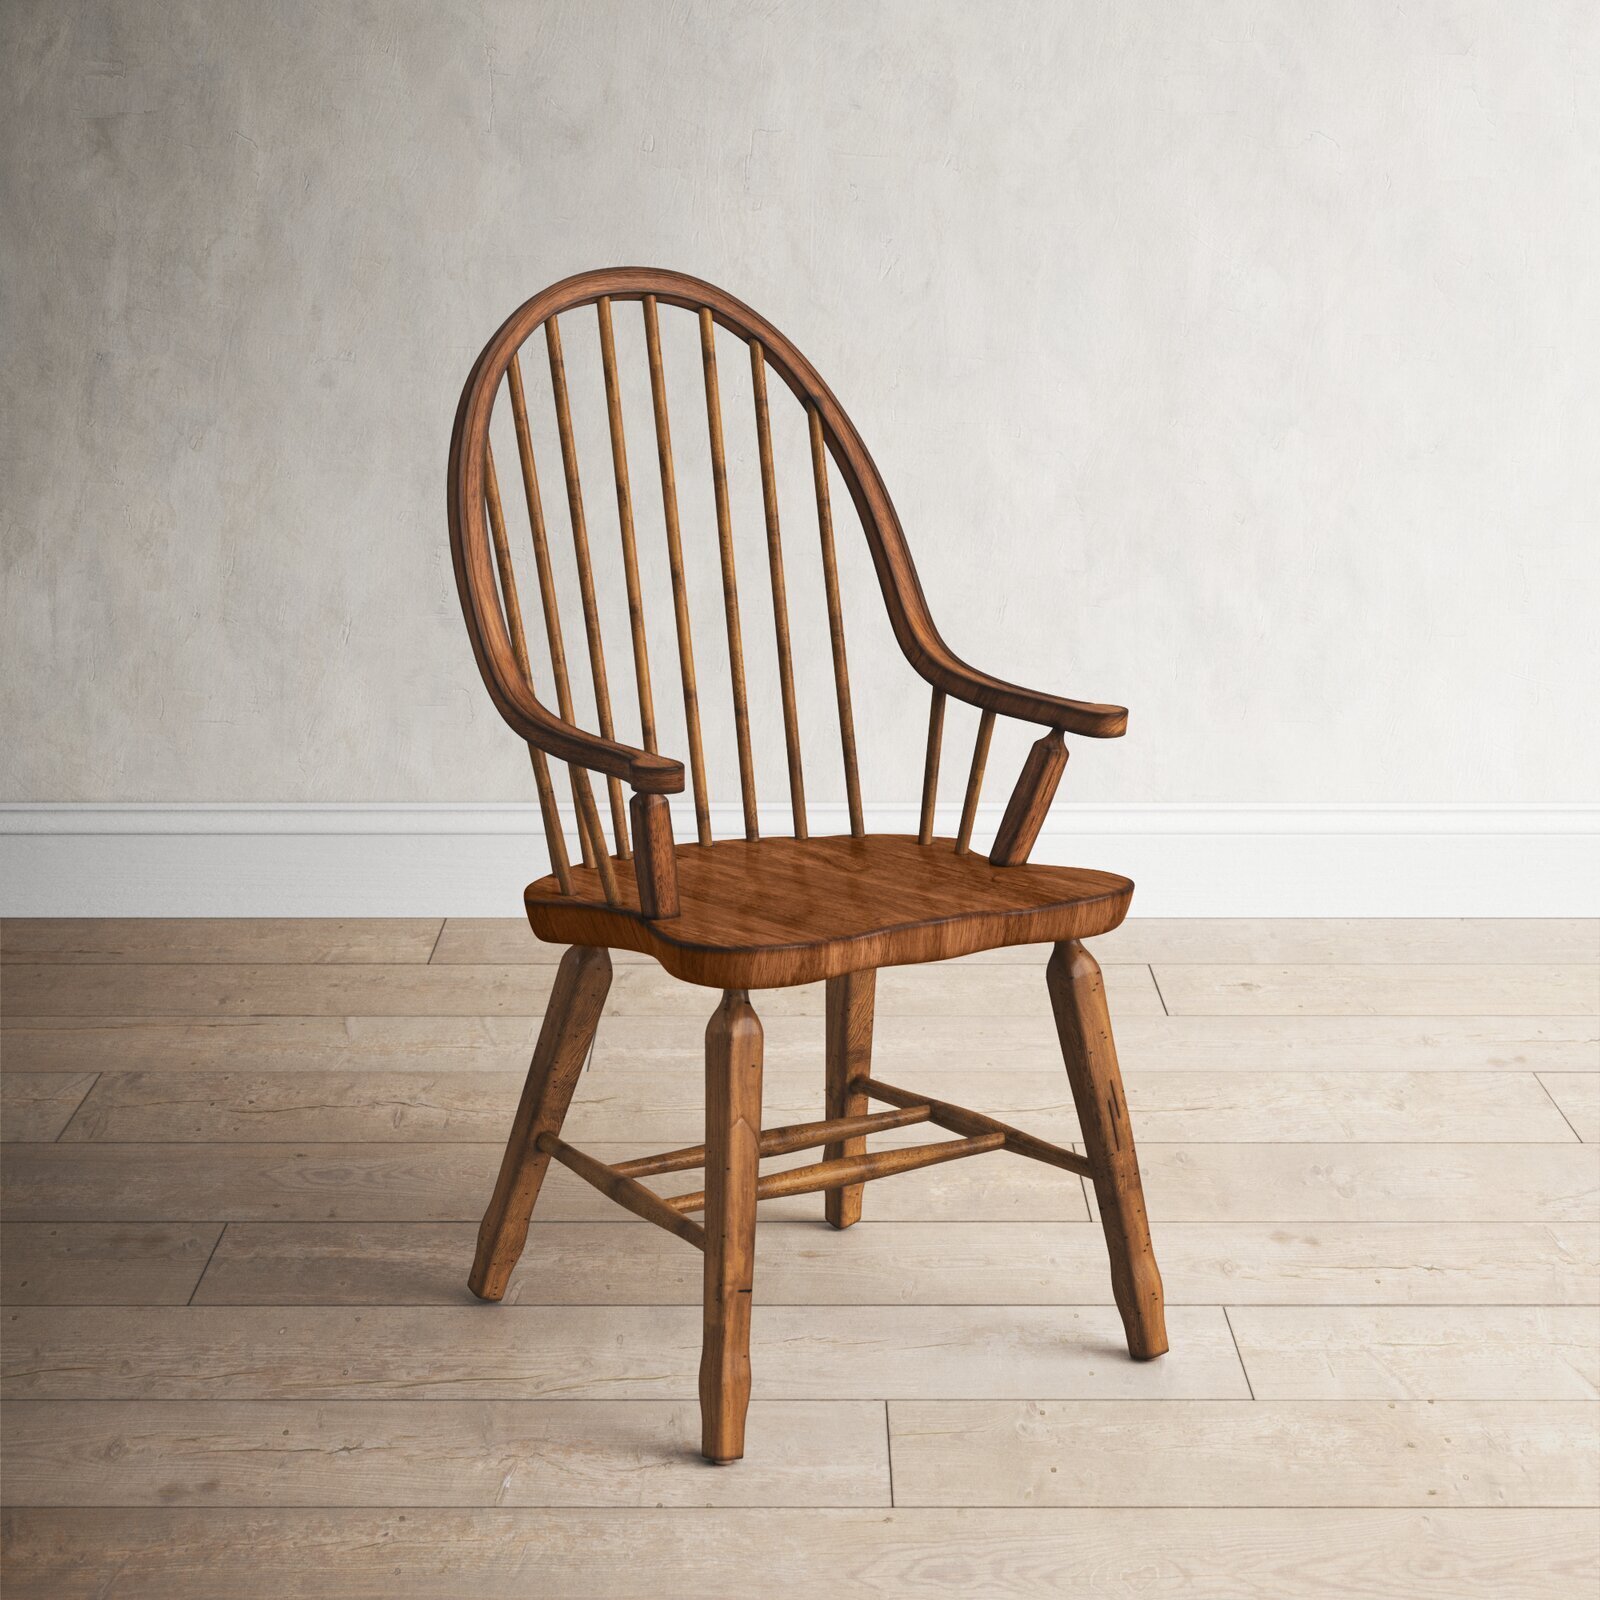 Wooden spindle back chair